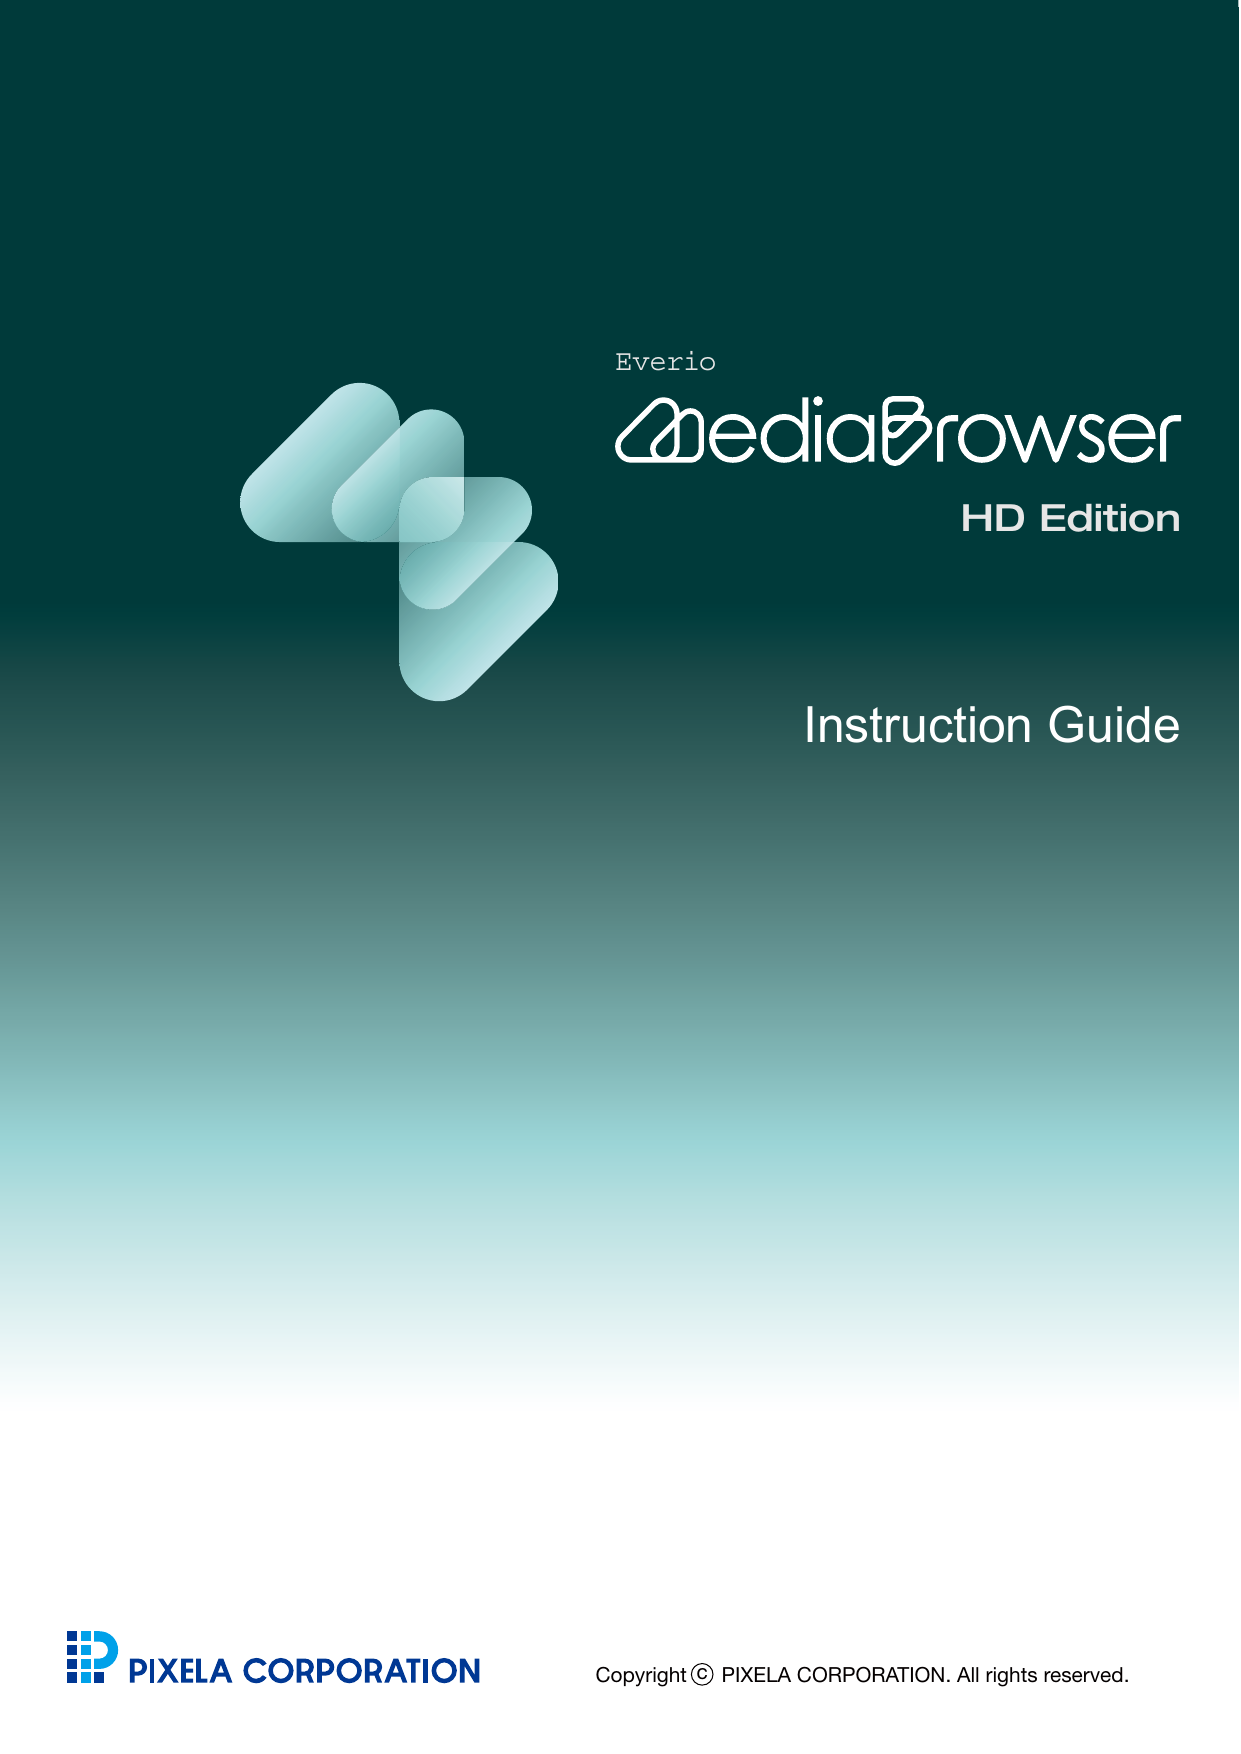 Jvc Everio Mediabrowser Hd Edition Instruction Guide If Not Then 27